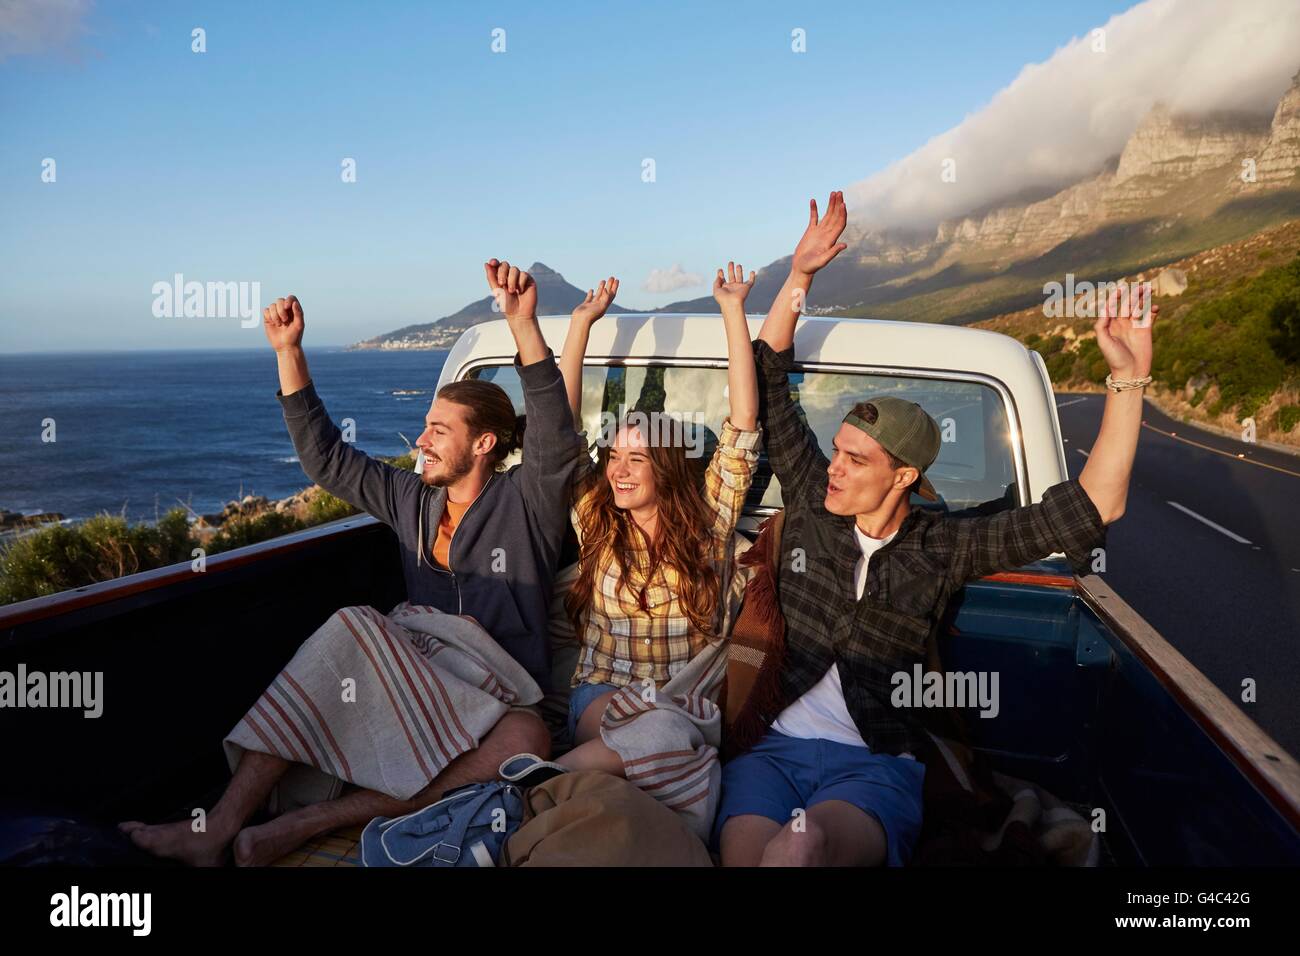 MODEL RELEASED. Young friends in pick up truck with arms raised, Stock Photo